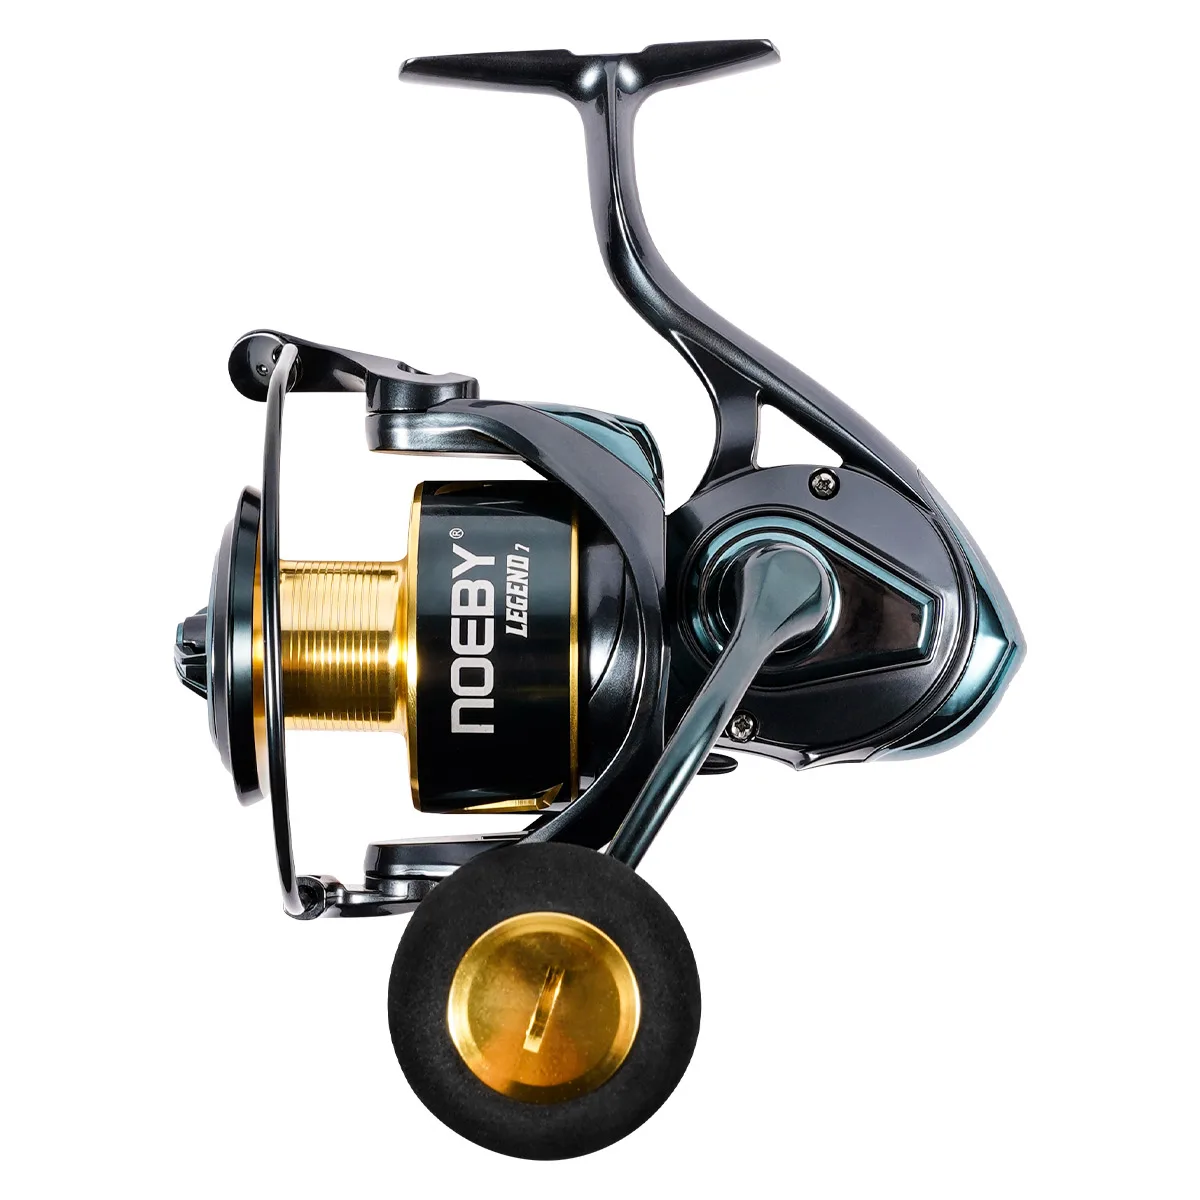 Size 2000 4000 Stock Spinning Fishing Reel - China Sample Free and